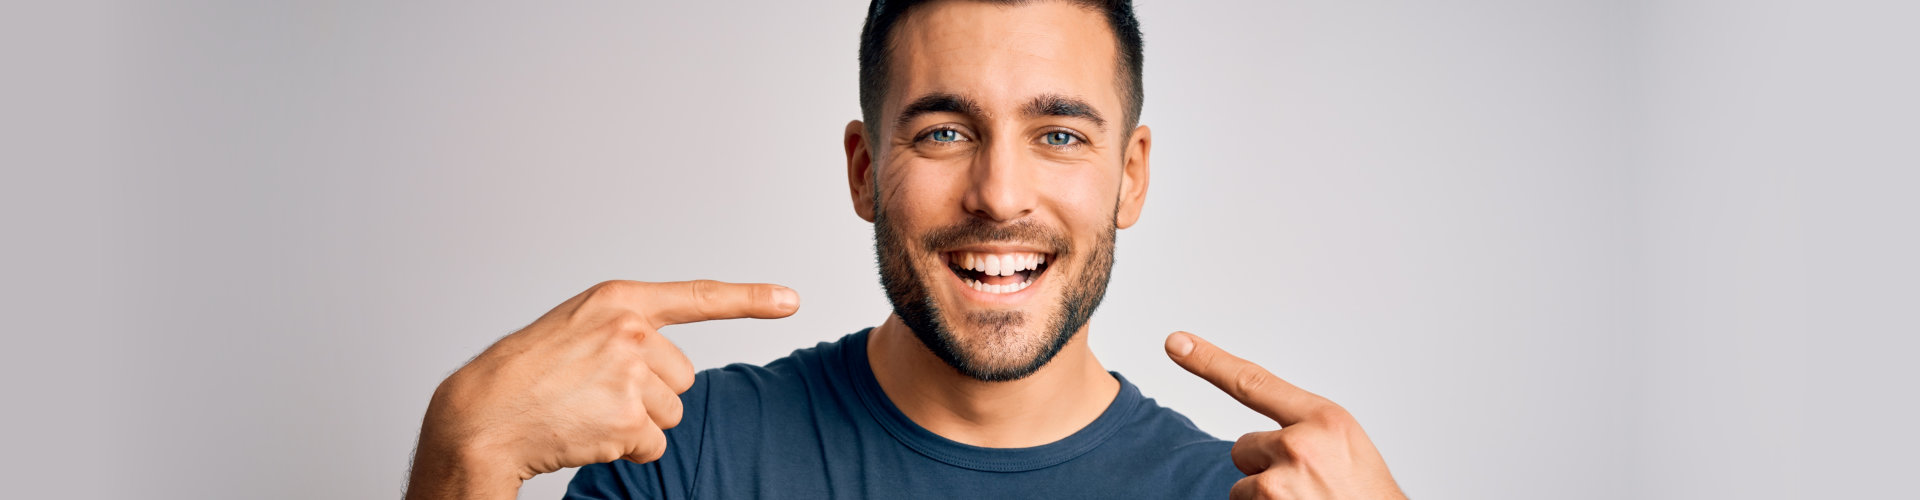 man smiling with confidence